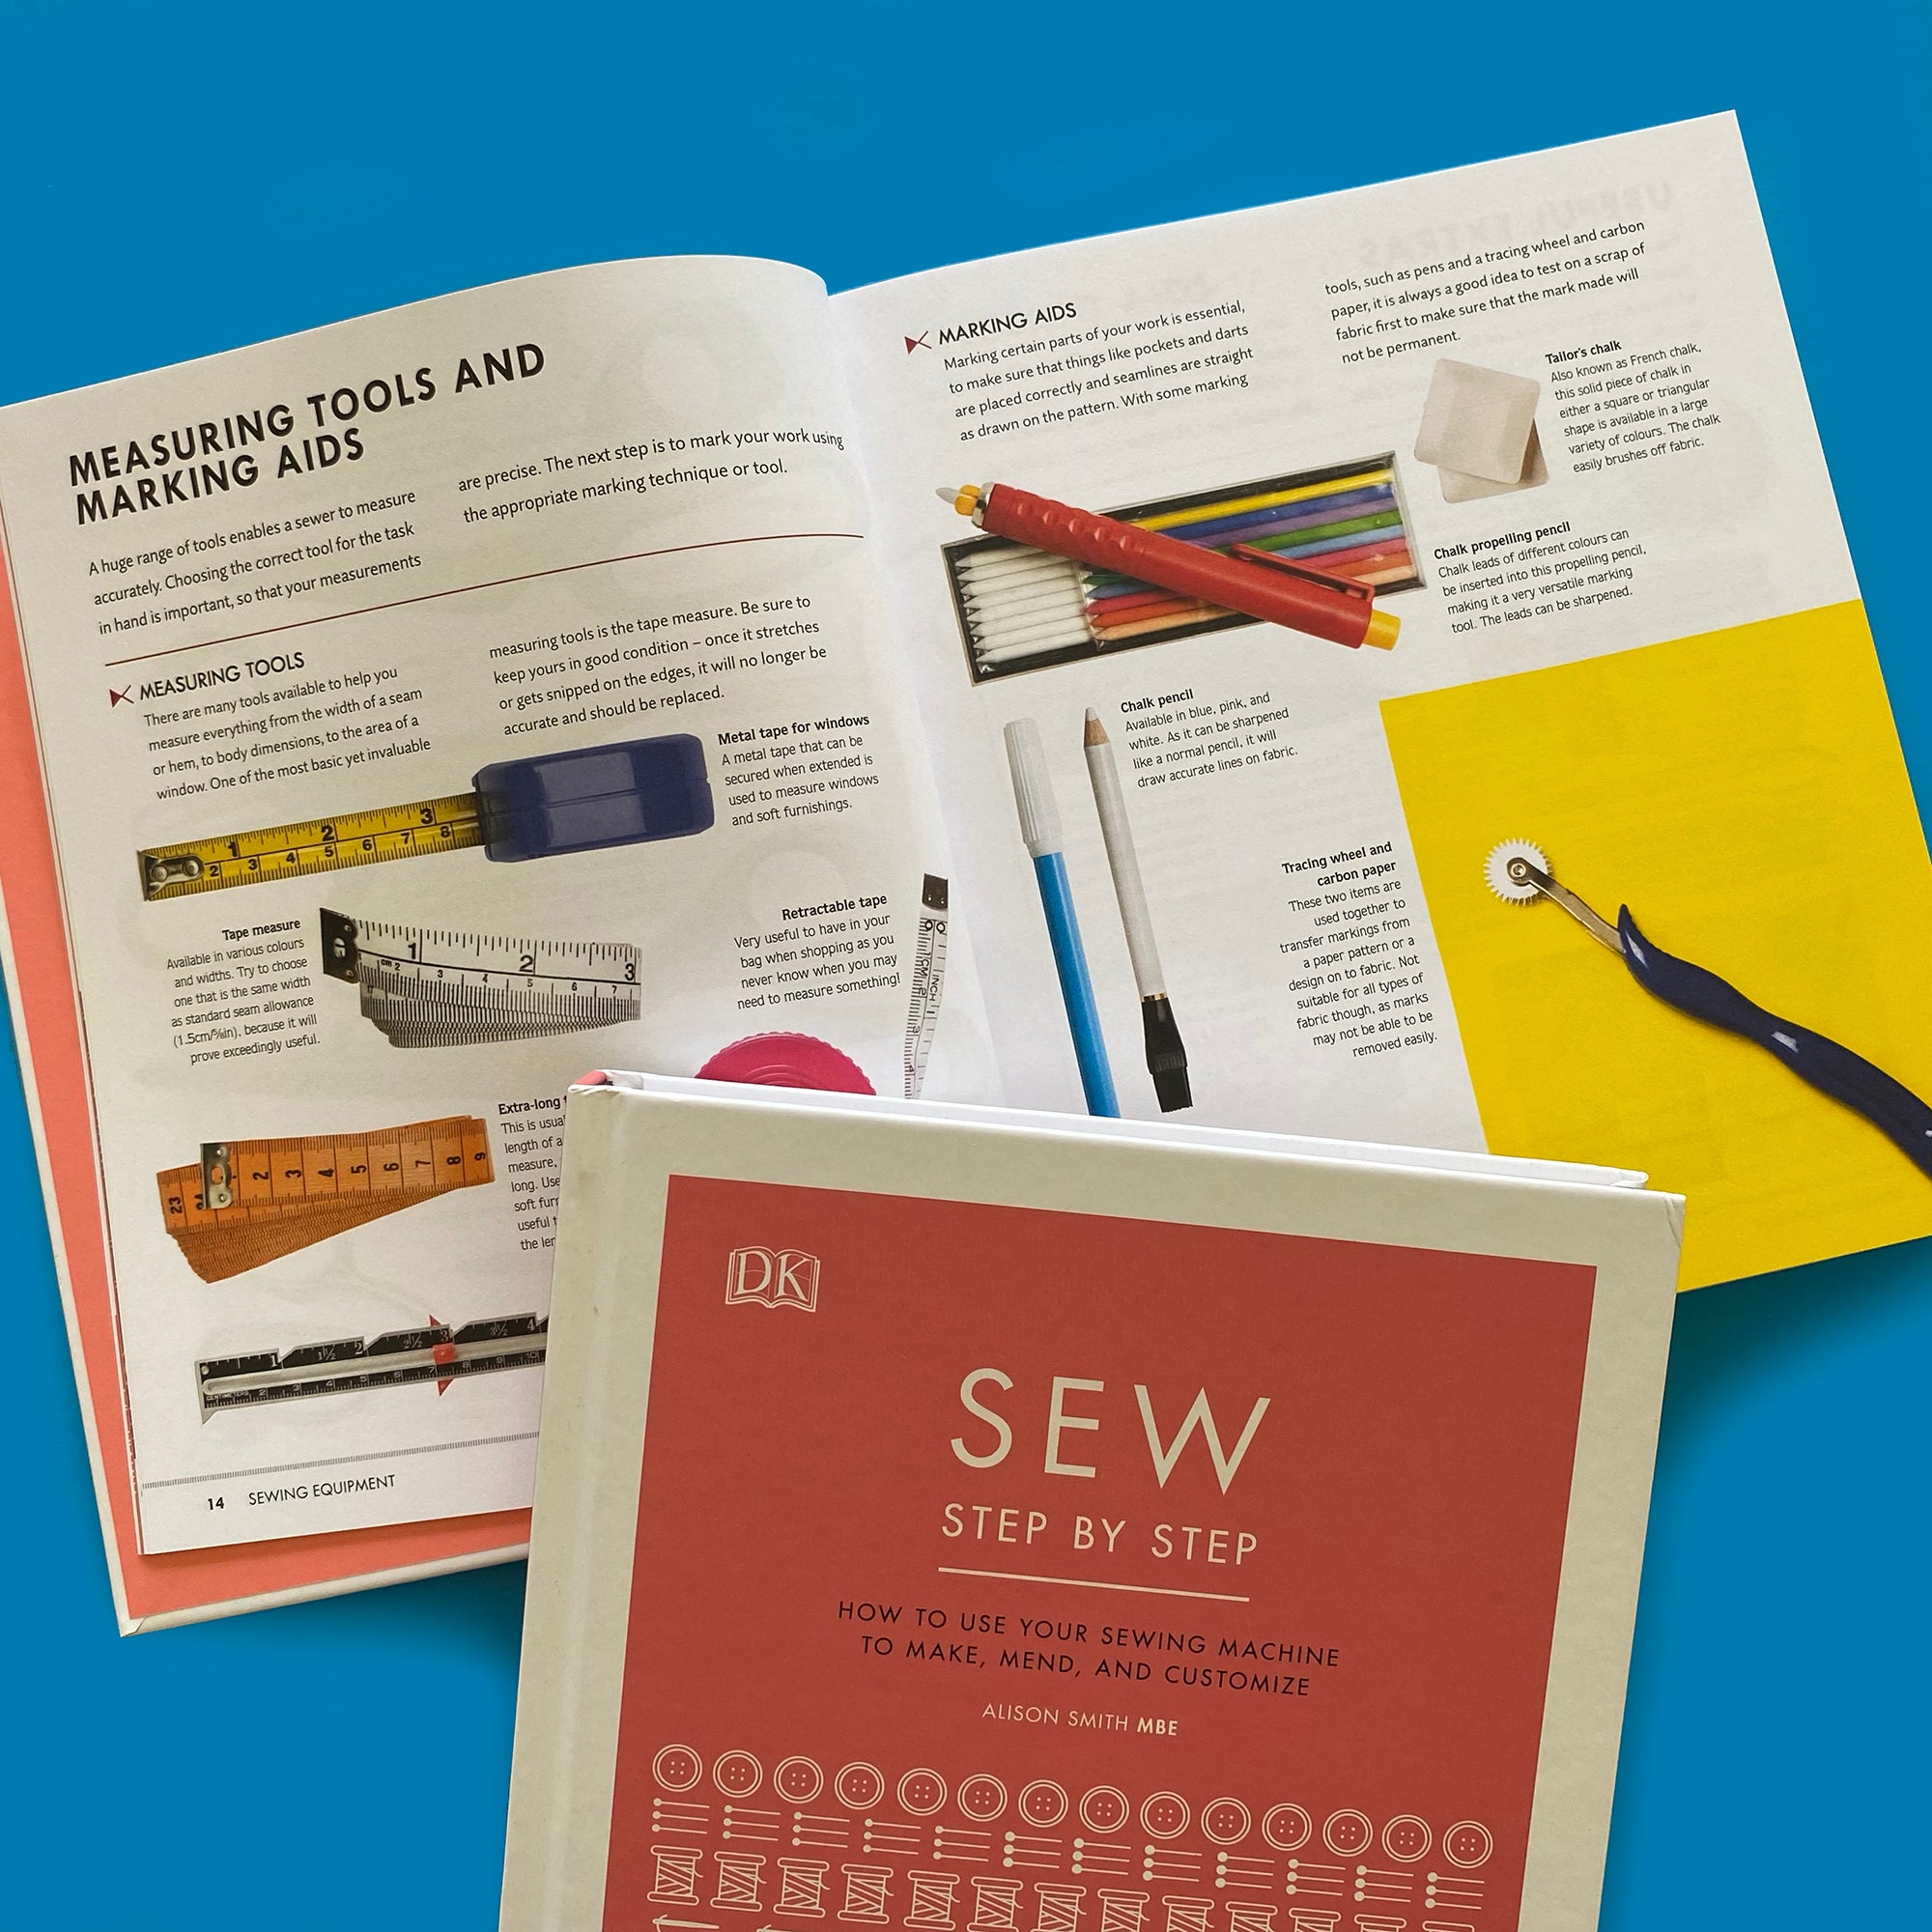 Sew Step-by-Step - 5% OFF